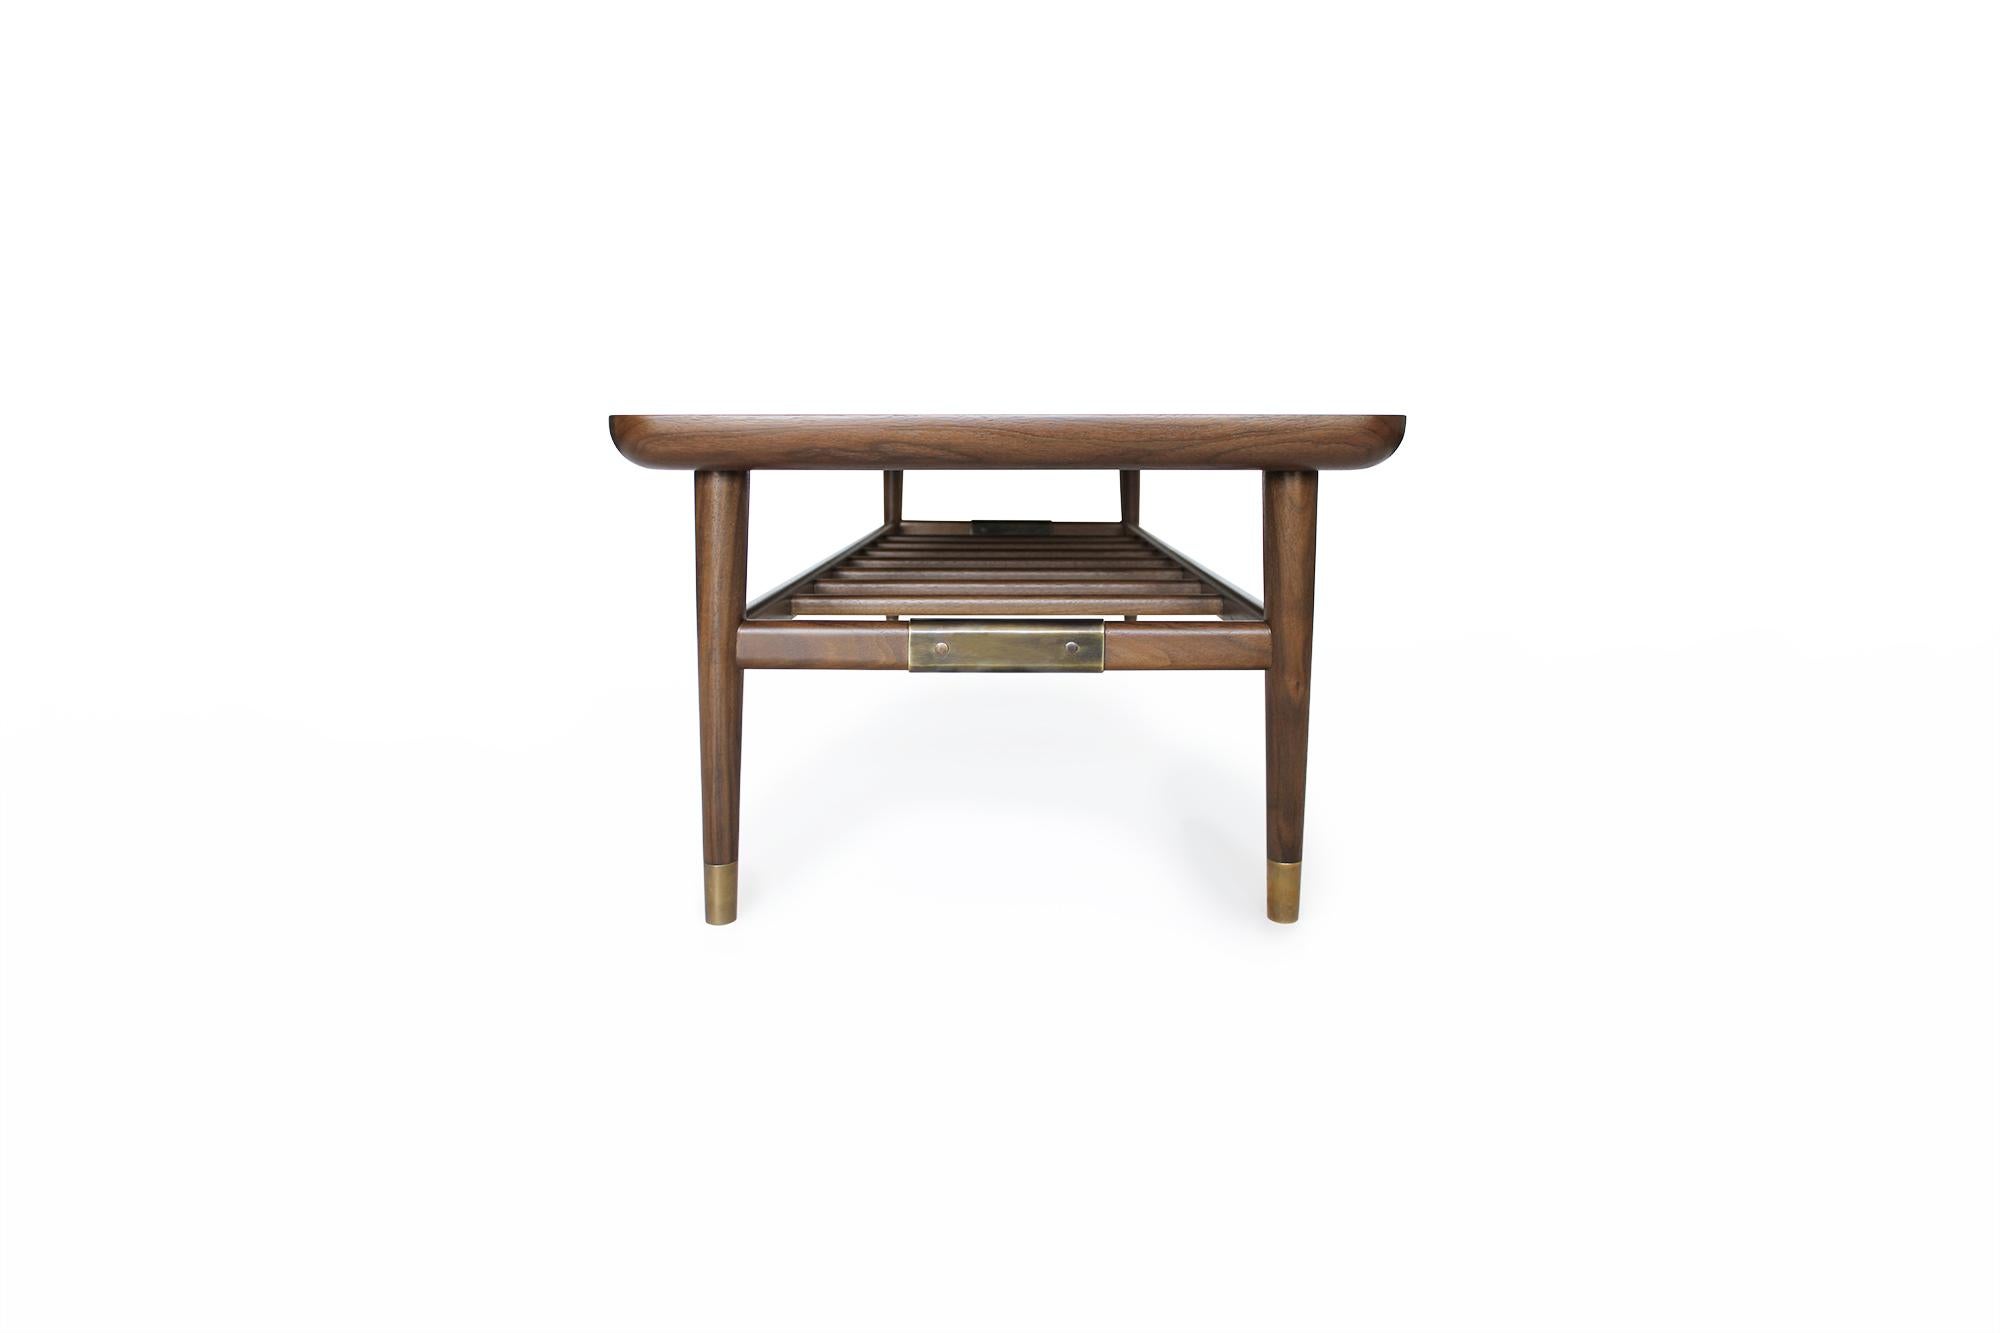 Contemporary Oslo Cocktail Table in Light Walnut with Antique Brass Fittings